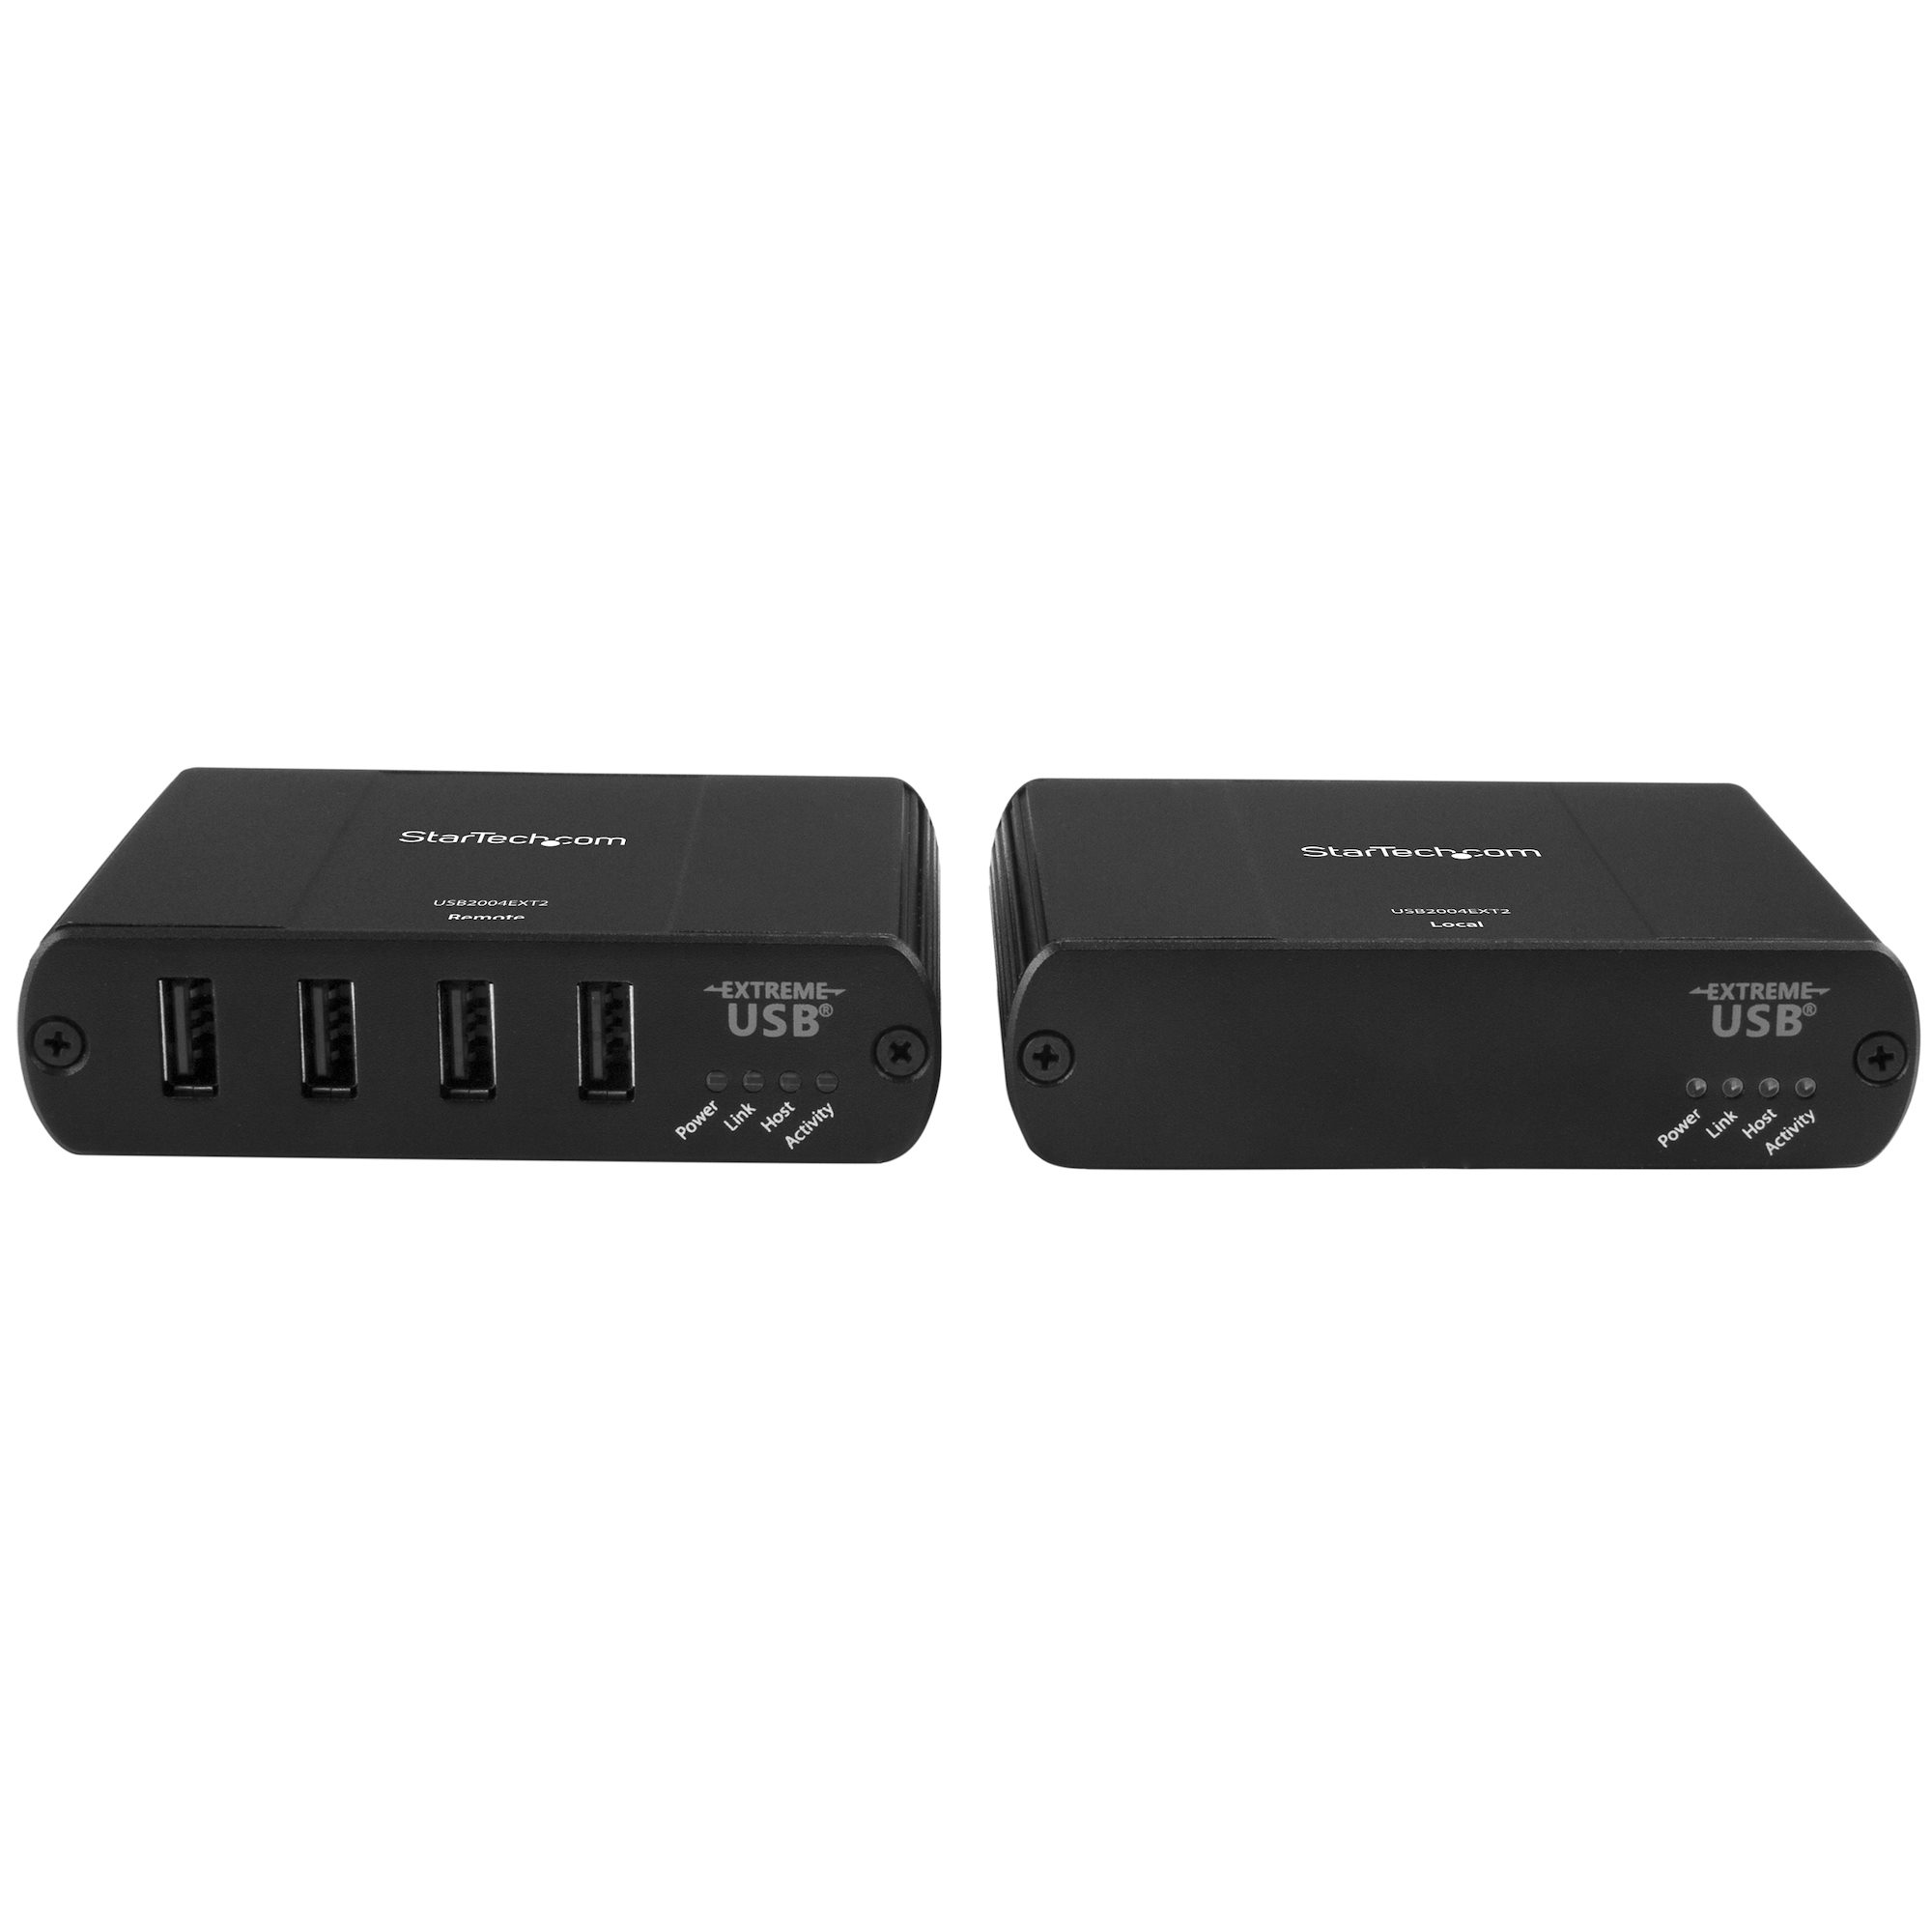 4-Port USB Extender - Up to 330 ft (100m) USB 2.0 over Cat5/Cat6 Extender -  480 Mbps USB Over Ethernet Extender